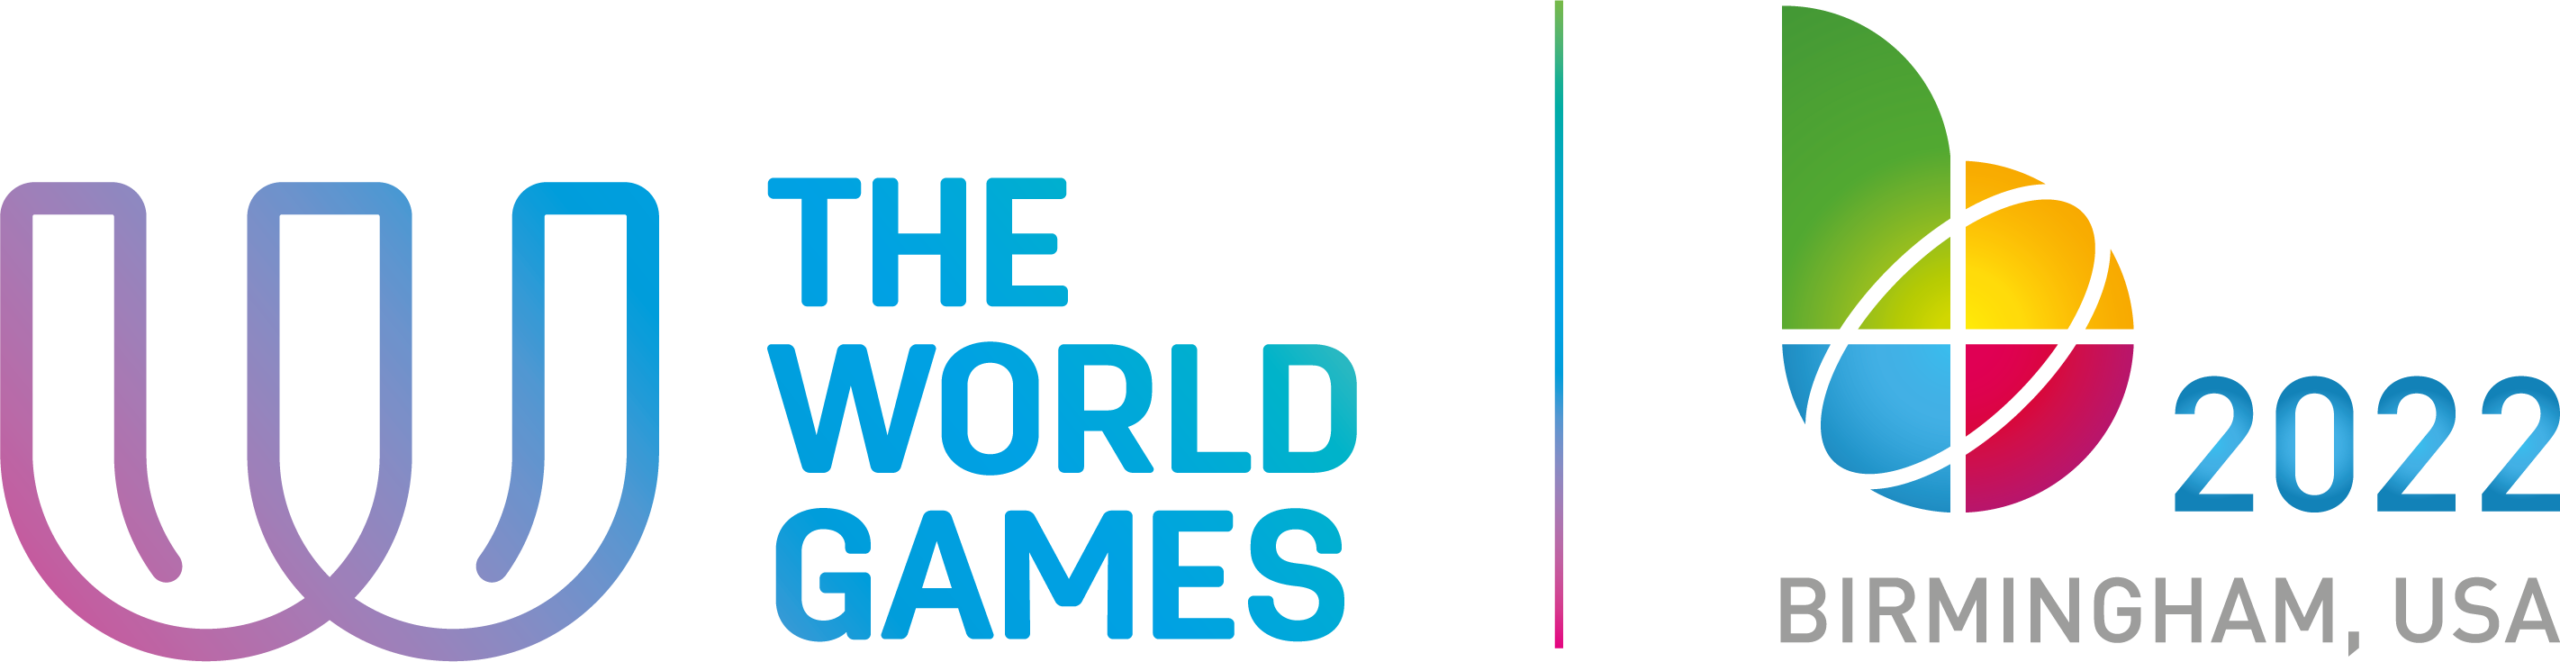 Photo of combined The World Games logo with the 2022 Birmingham, USA logo